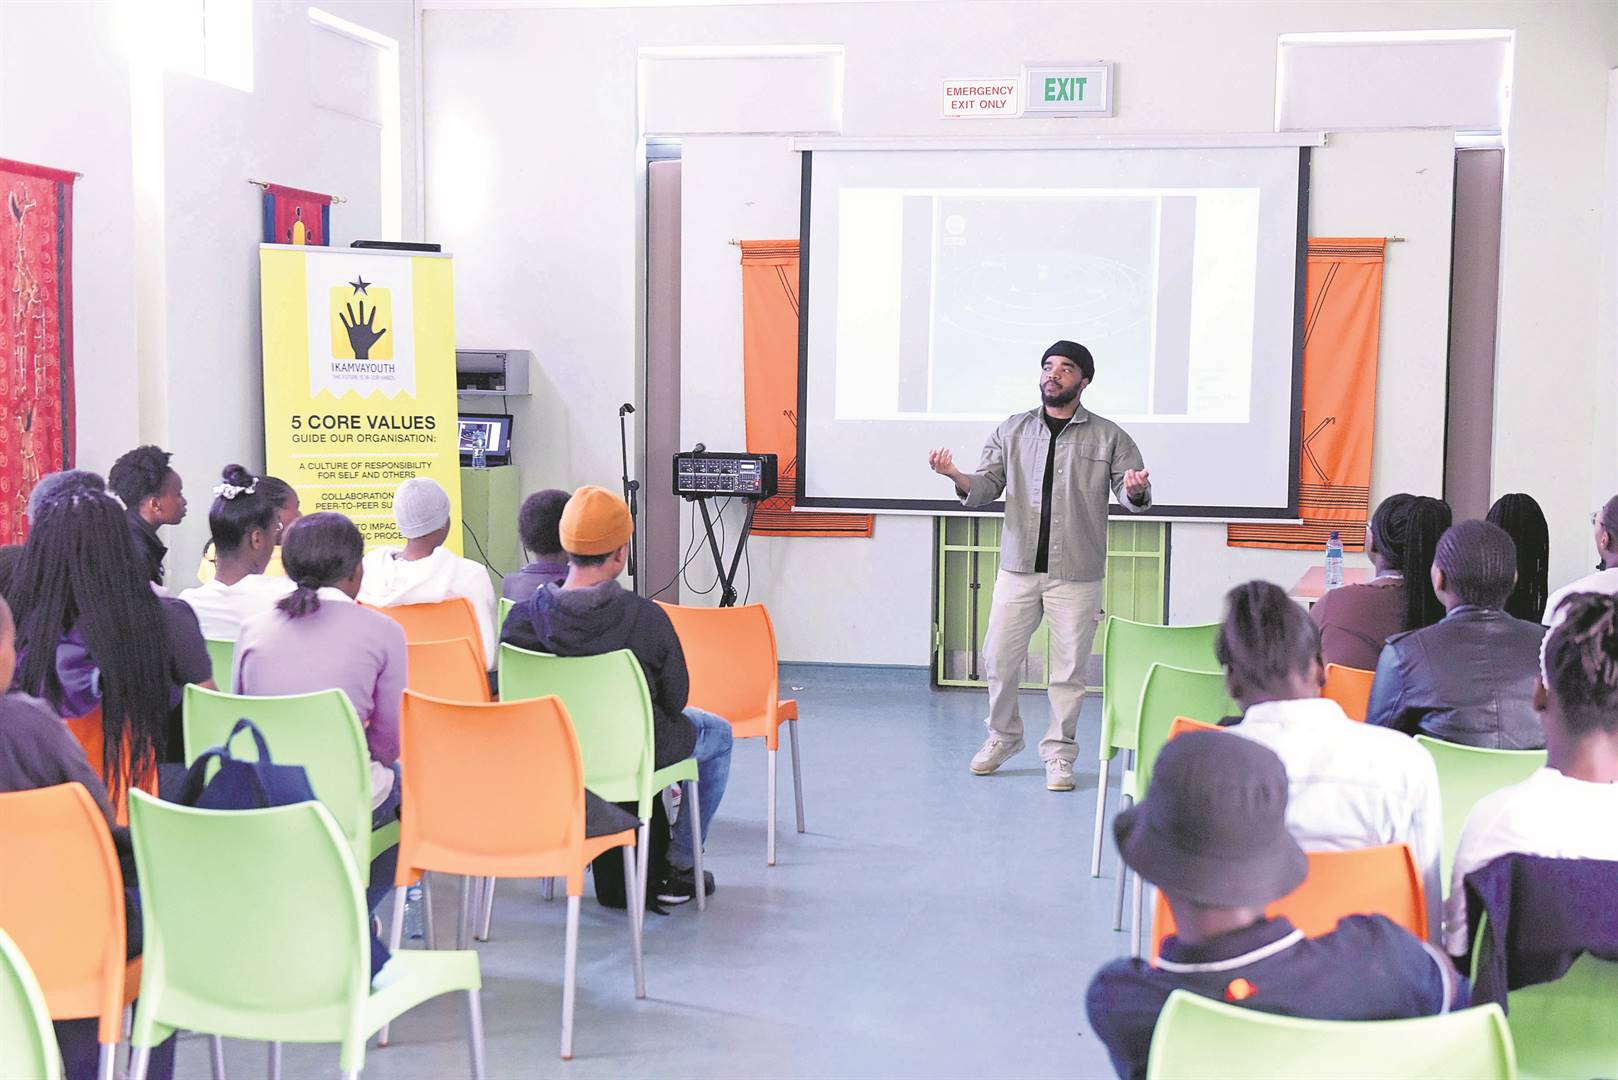 The summer school programme was recently offered to students at Ikamva Youth in Masiphumelele. PHOTO: University of Cape Town